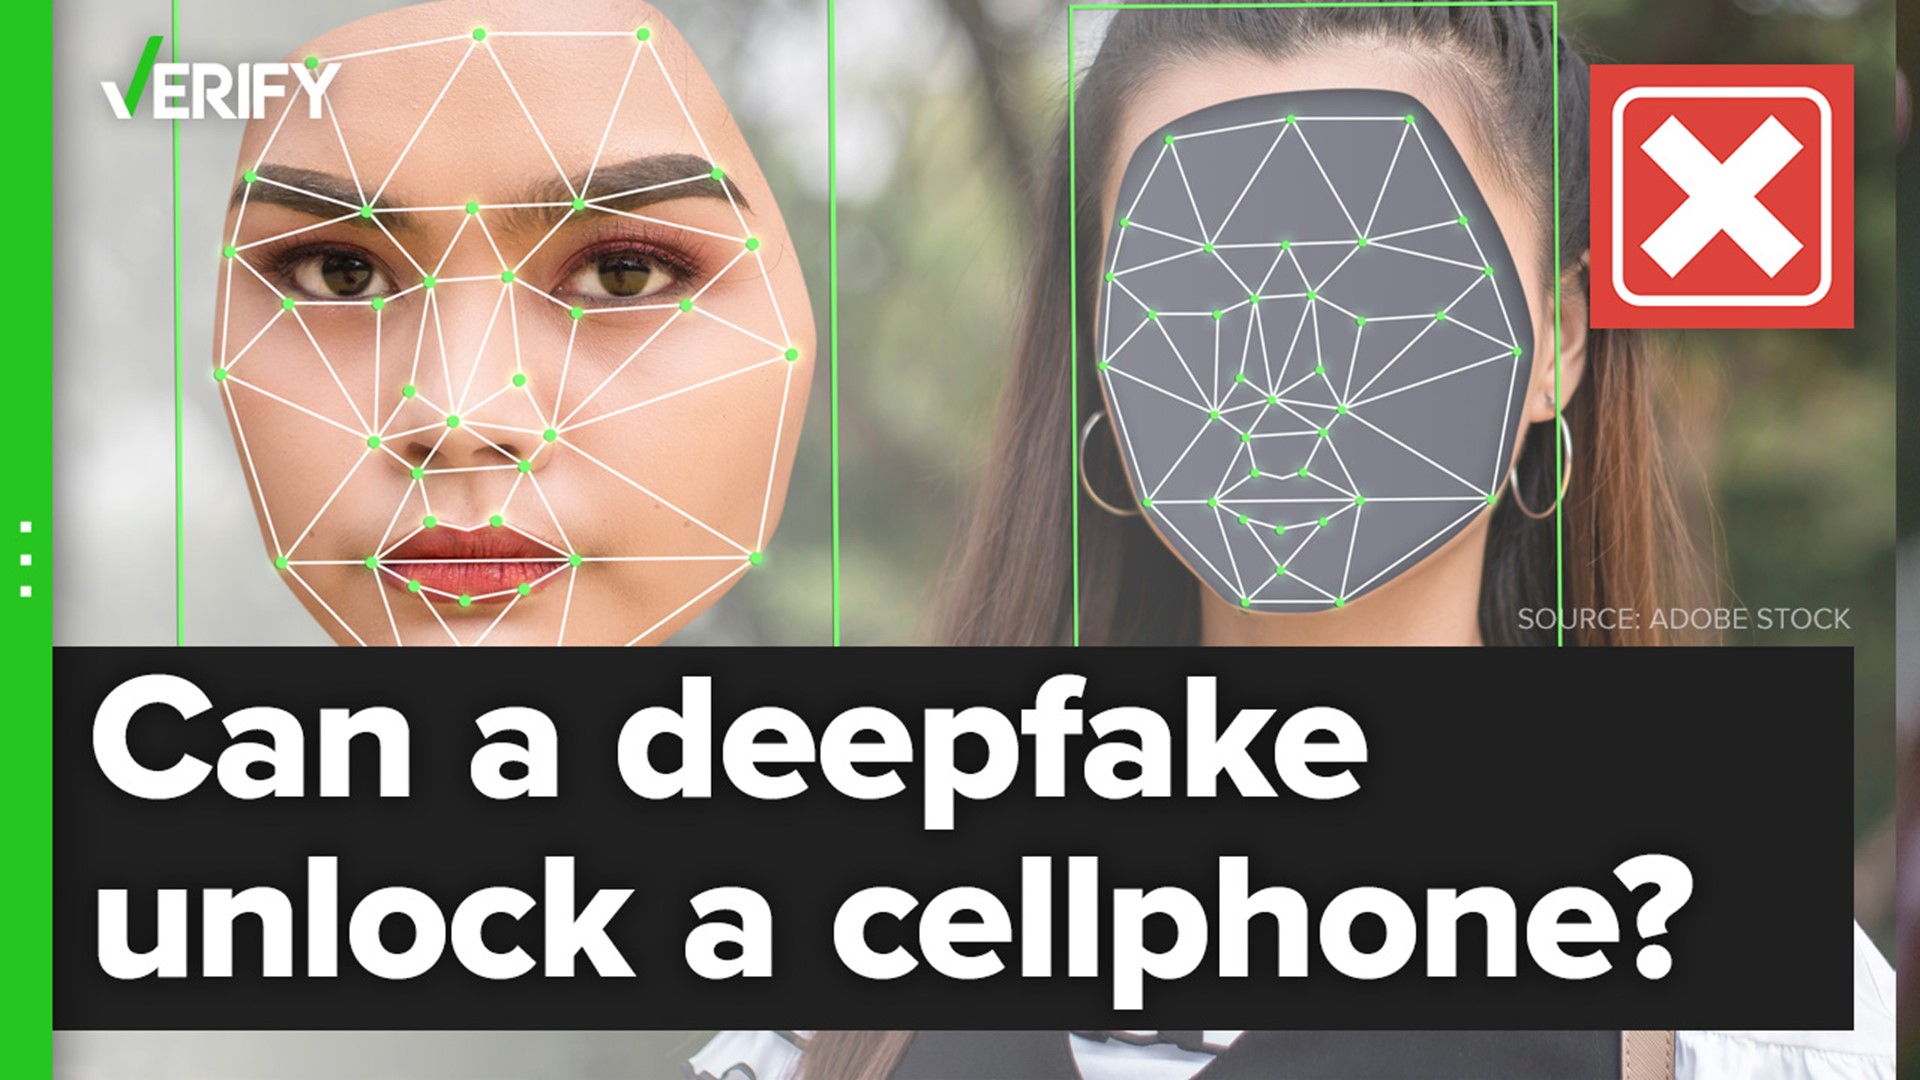 Deepfakes are two-dimensional, which is why deepfake videos or images can’t be used to unlock a smart device.